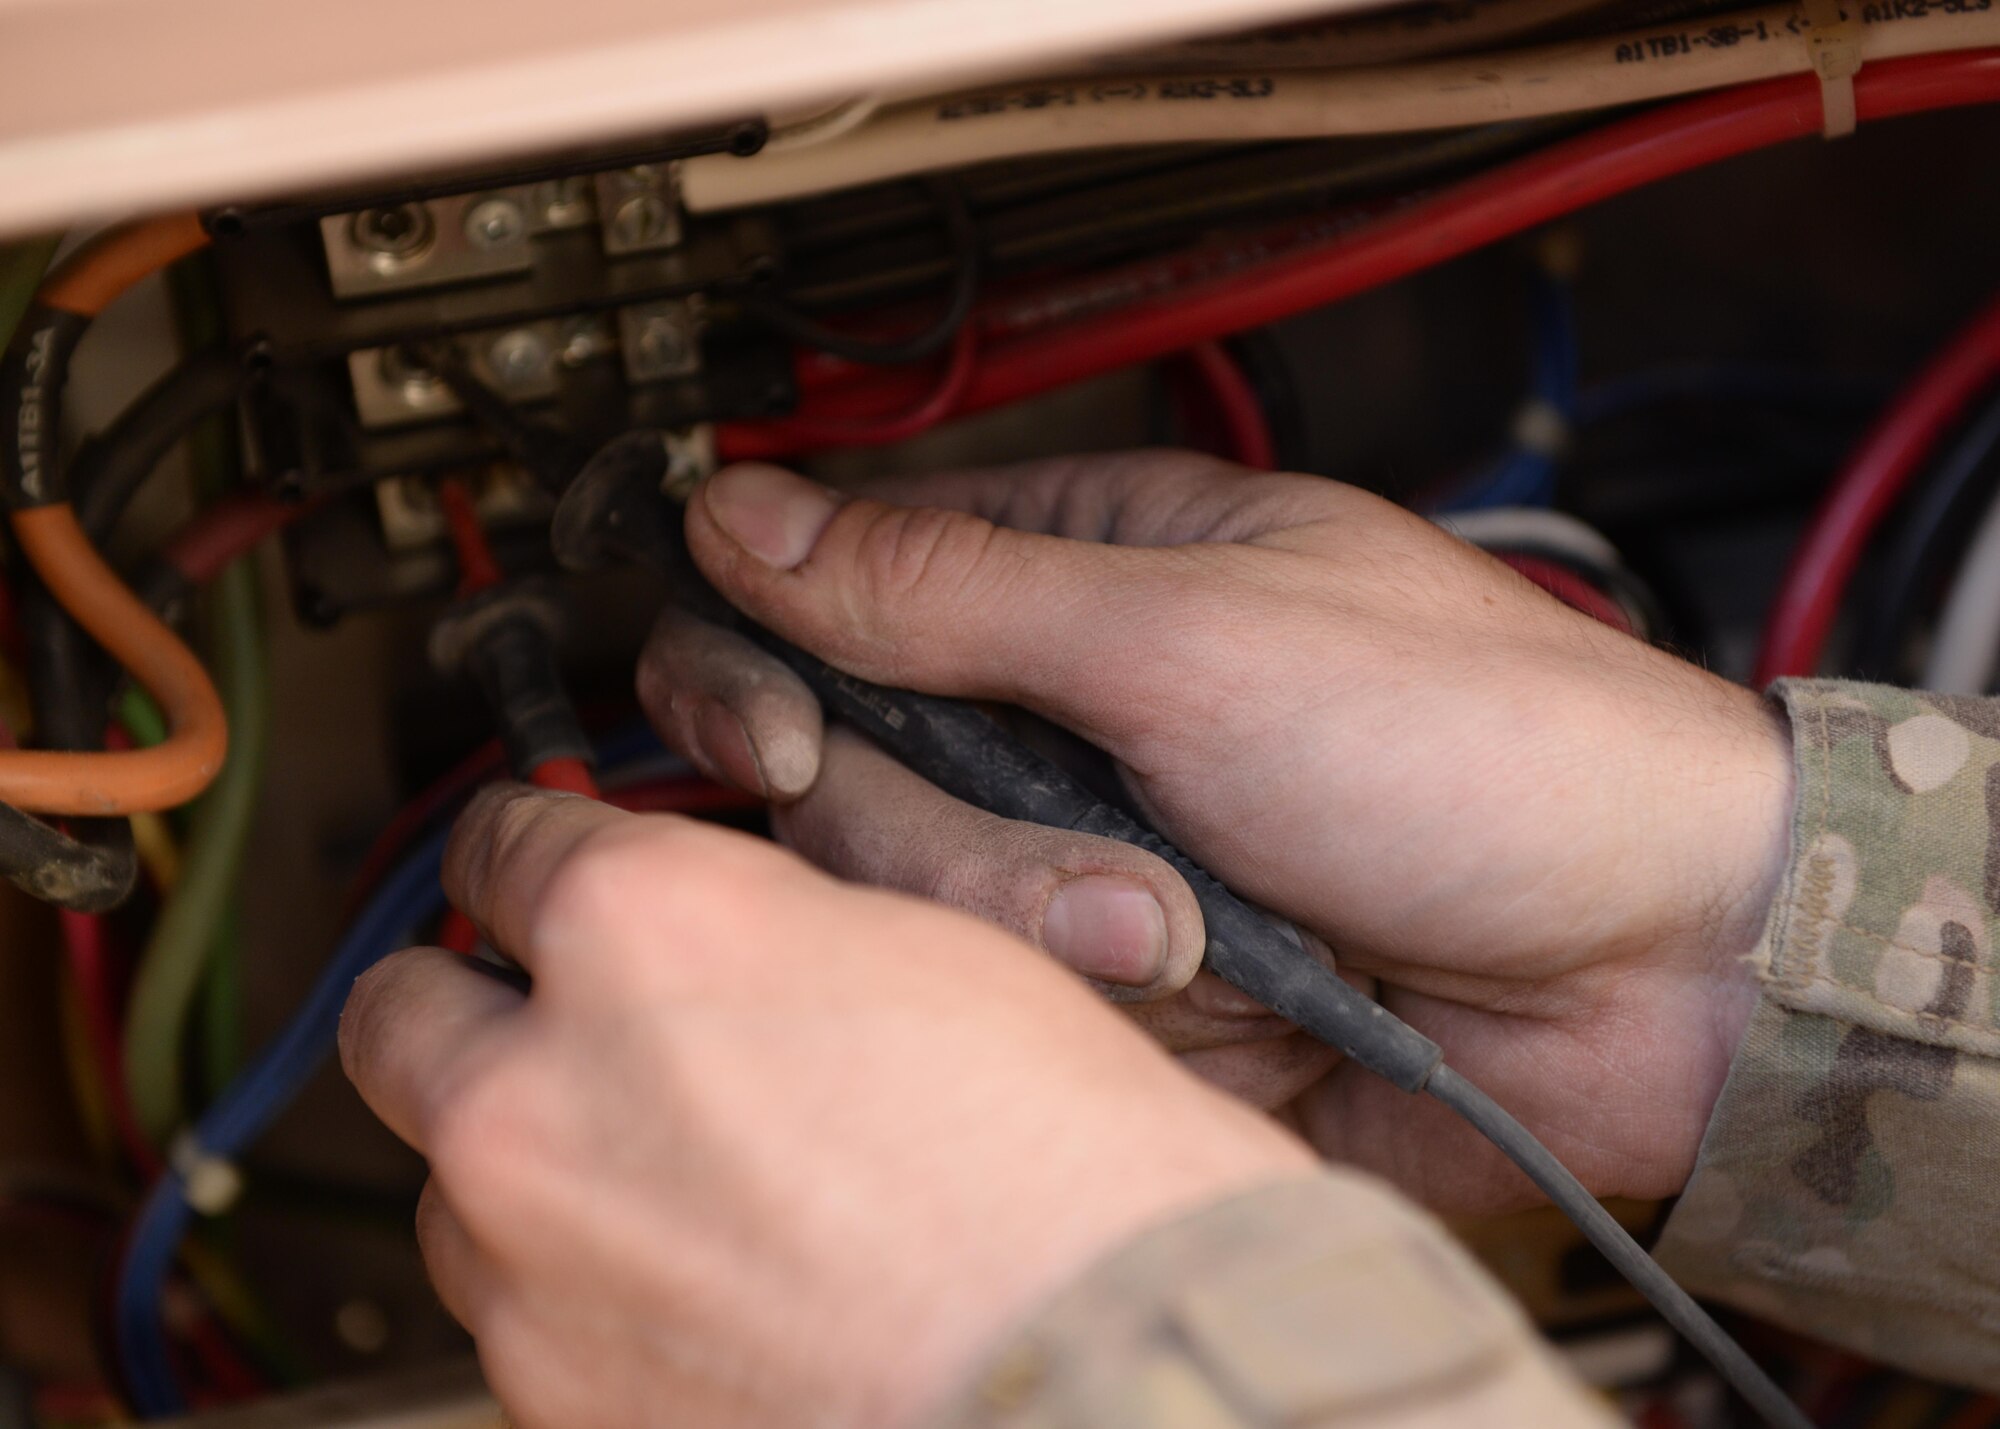 U.S. Air Force Staff Sgt. Russell Dutcher, 455th Expeditionary Civil Engineer Squadron HVAC technician, repairs an air conditioning unit June 30, 2015, at Bagram Airfield, Afghanistan. Dutcher, who is part of the 1000s of Hands project, is responsible for responding to all work orders dealing with AC problems as well as keeping Bagram’s mission equipment such as computers and servers cool. (U.S. Air Force photo By Senior Airman Cierra Presentado/Released)